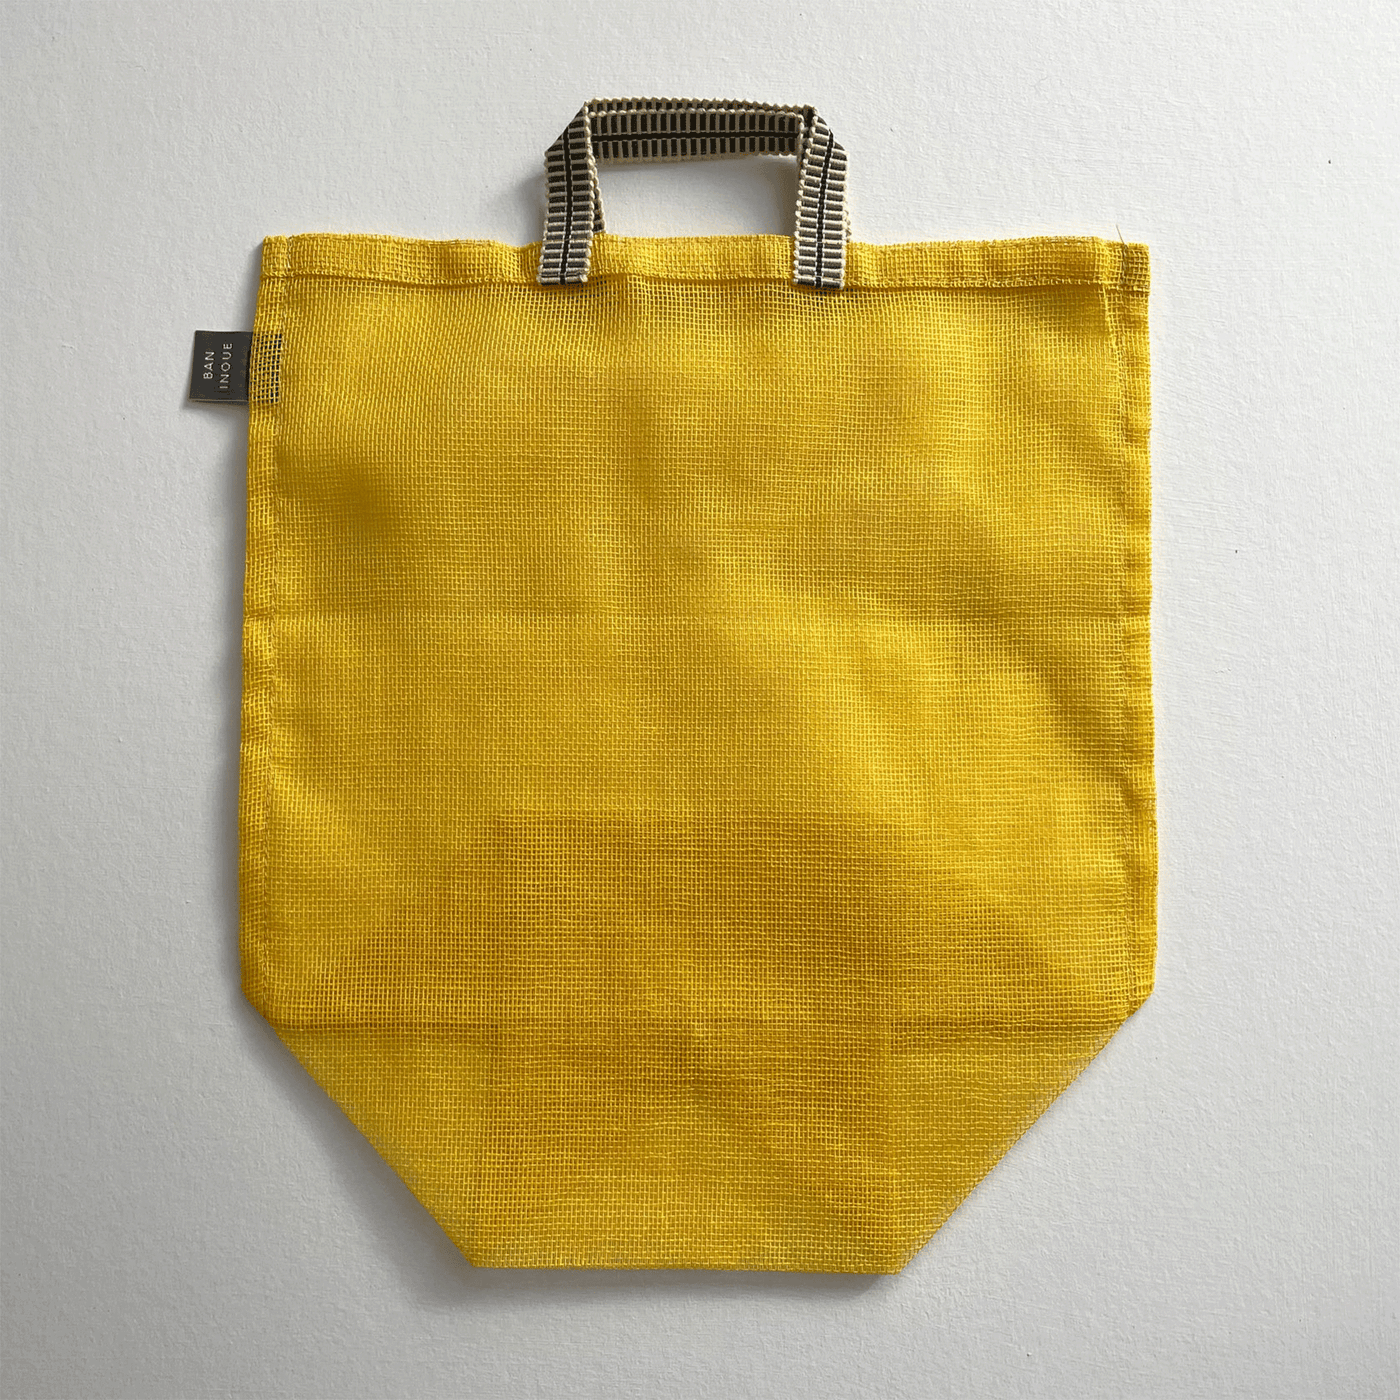 fort and field | Produce bags with handle (Medium)